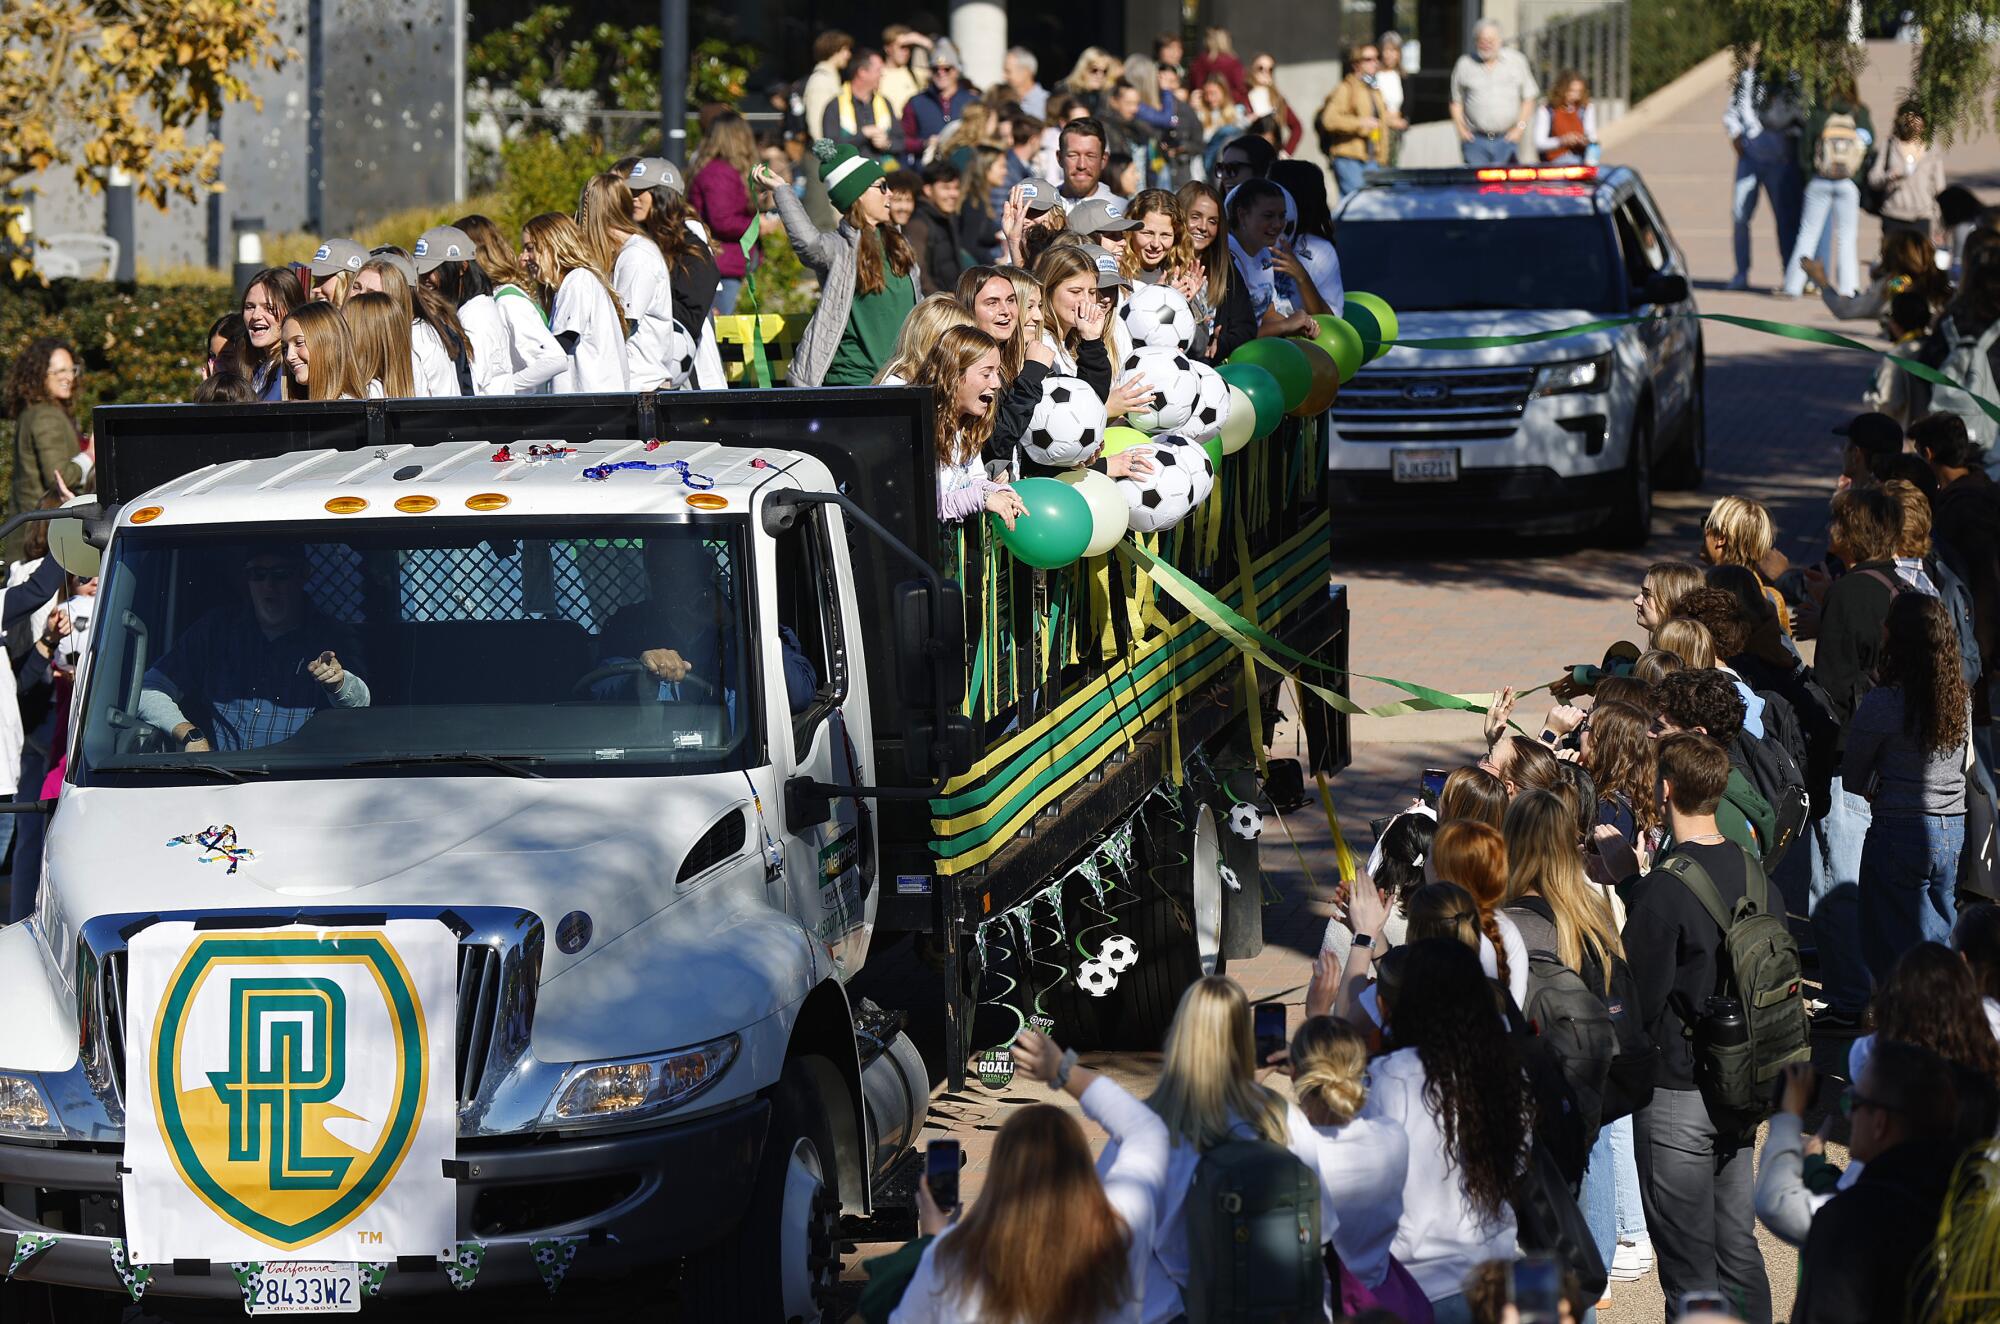 Crowds cheer as a flatbed truck full of women in soccer uniforms holding soccer balls and balloons drives down a street.